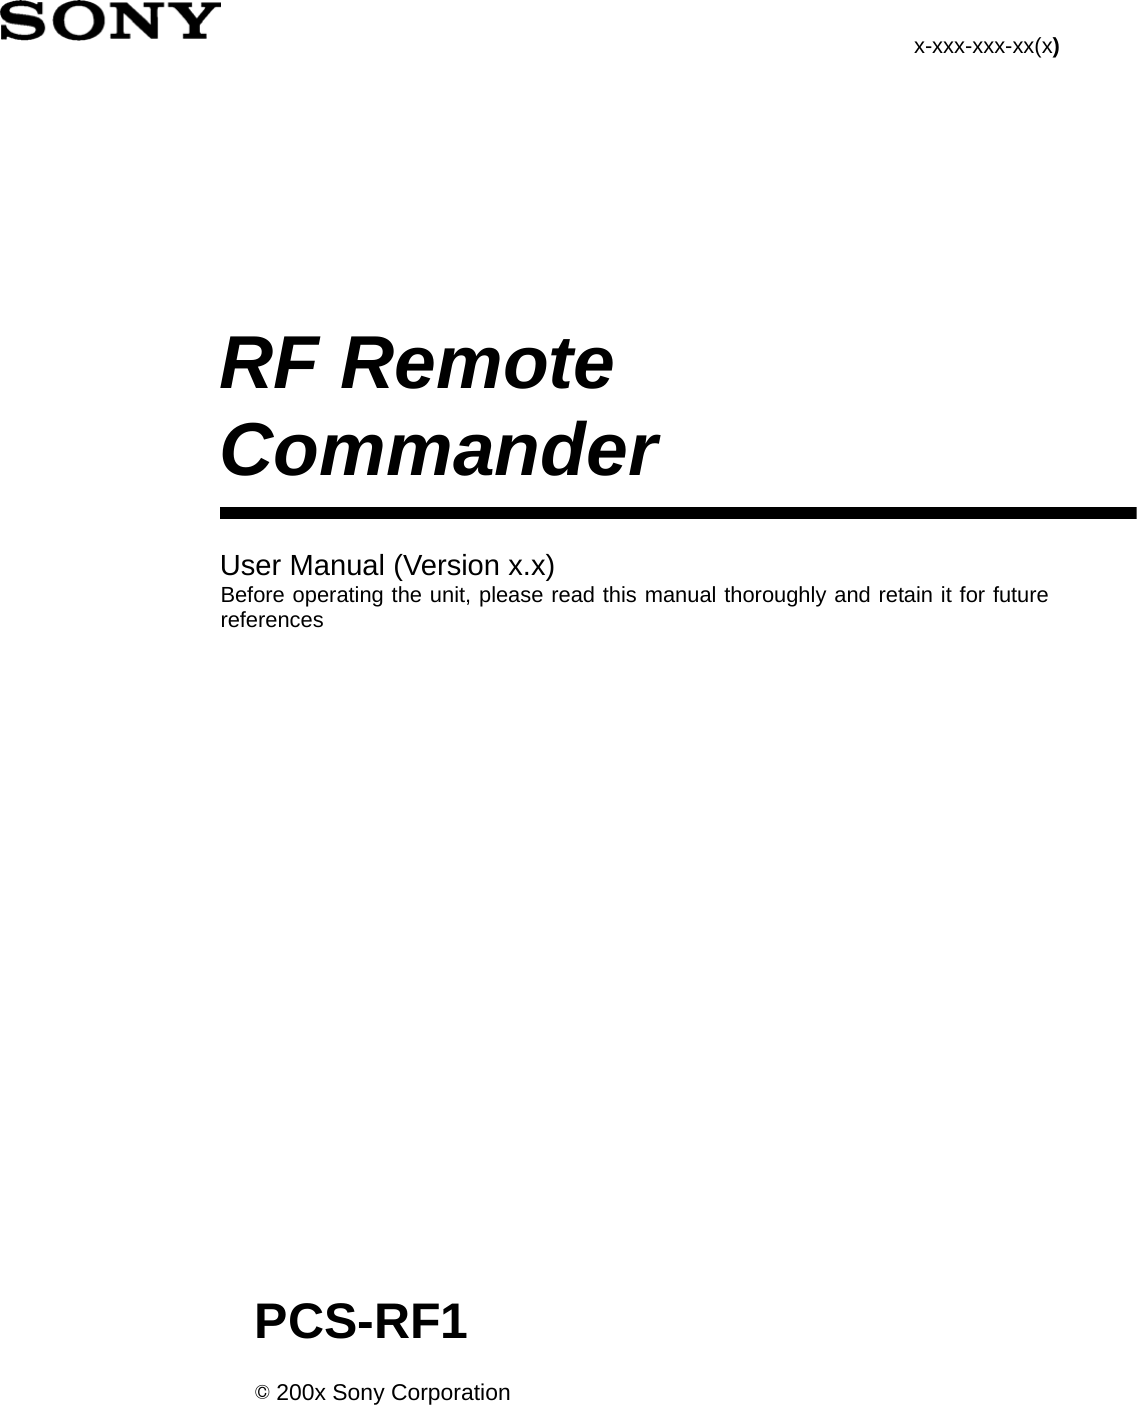             RF Remote   Commander    User Manual (Version x.x) Before operating the unit, please read this manual thoroughly and retain it for future references PCS-RF1© 200x Sony Corporationx-xxx-xxx-xx(x)